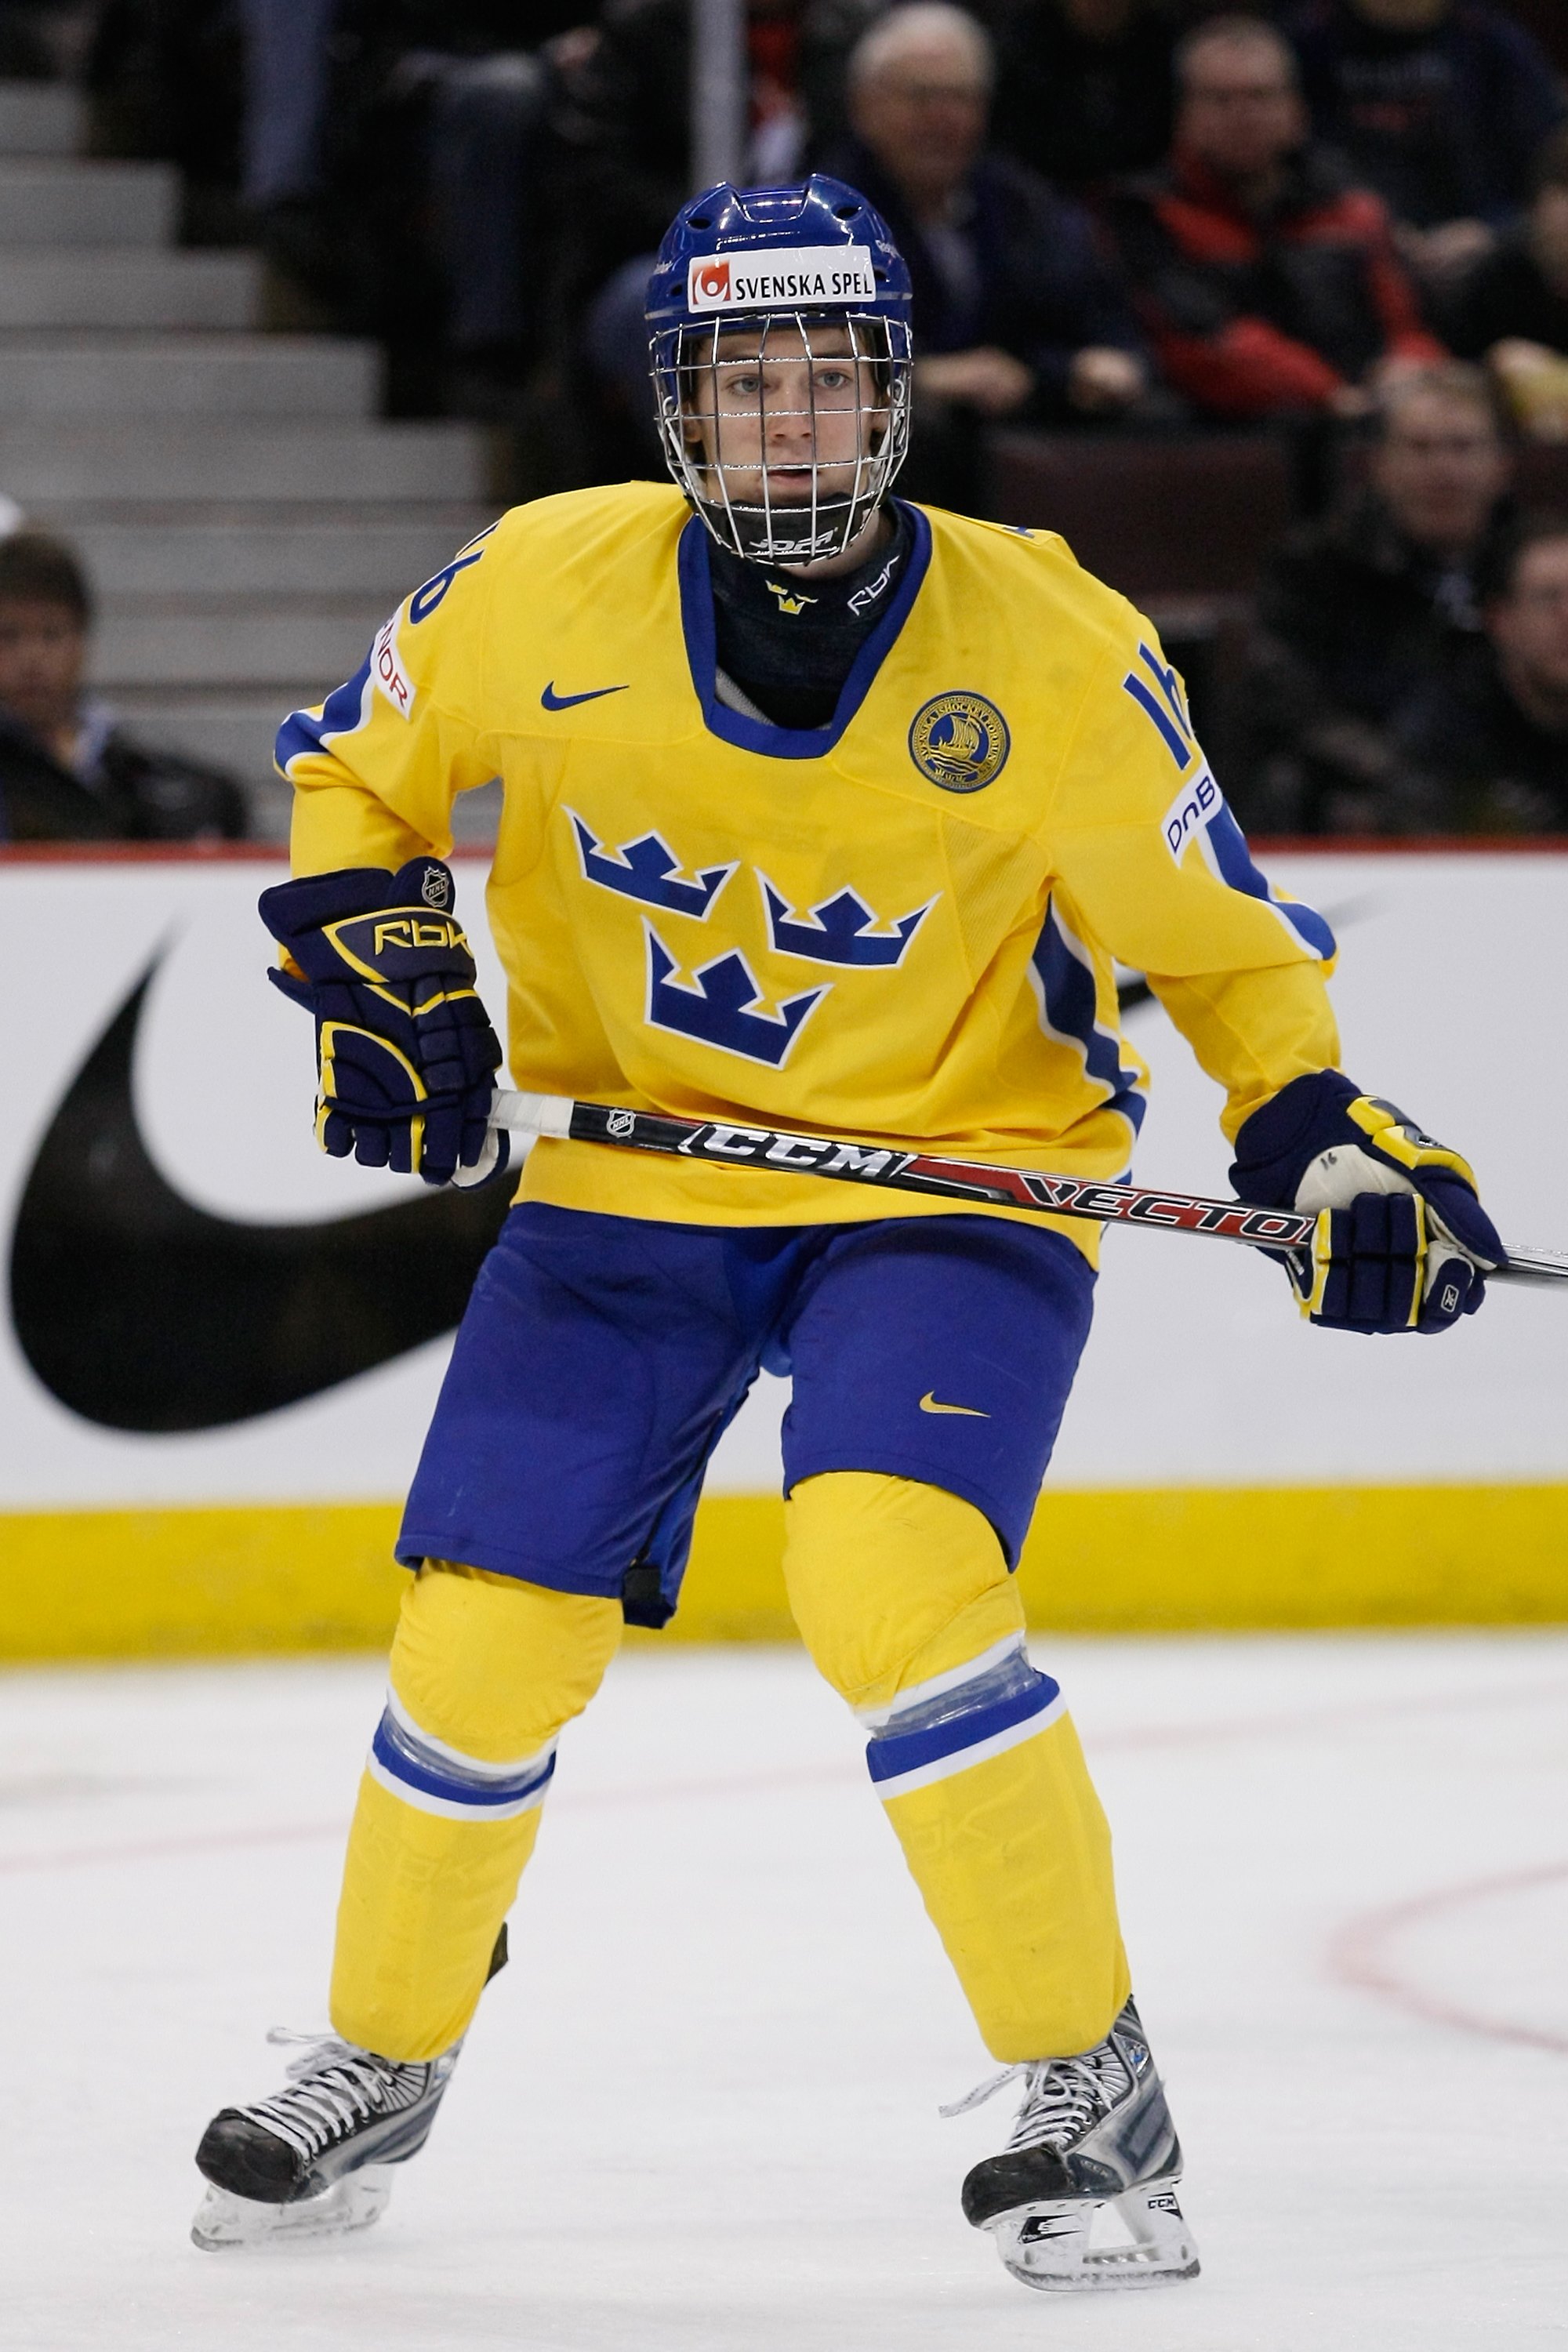 A new class of top-tier Asian hockey talent joins the NHL — and